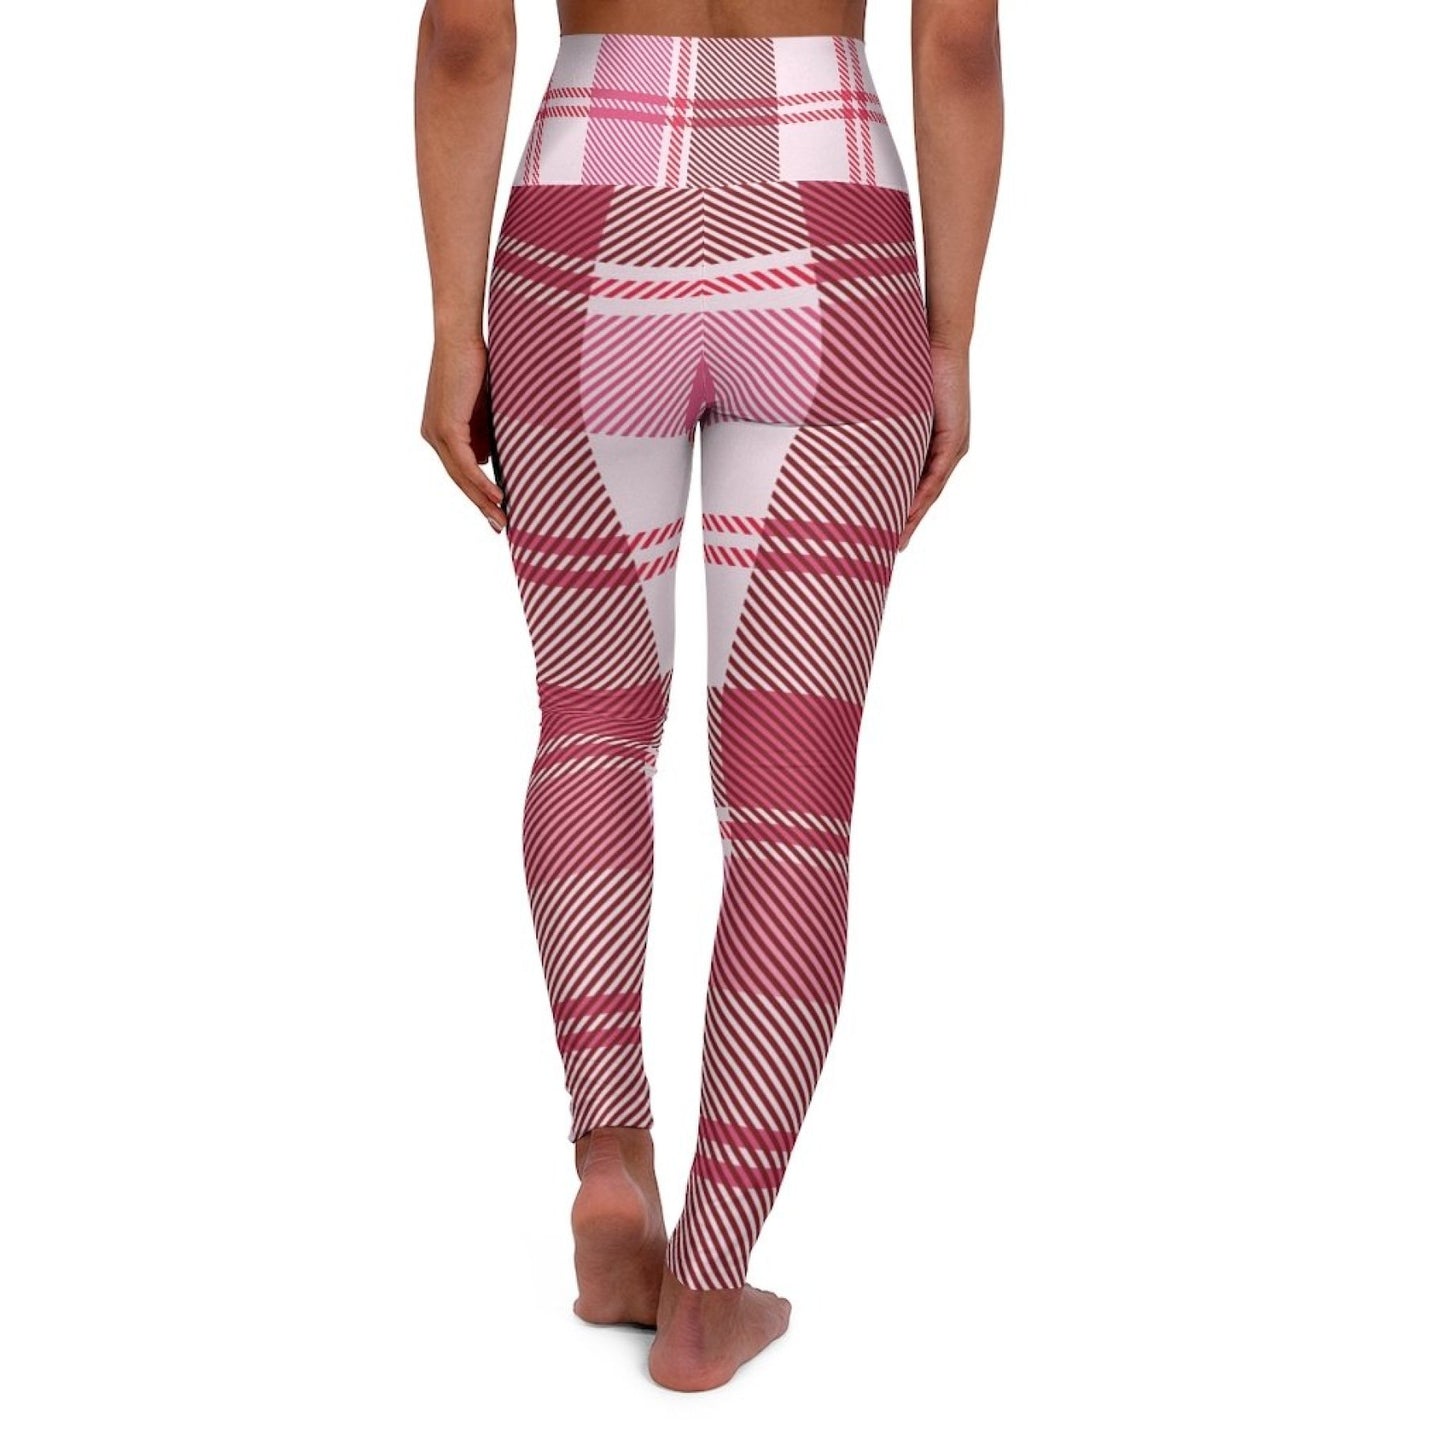 Womens Leggings, Pink And White Plaid Style High Waisted Fitness Pants - Walbiz.com